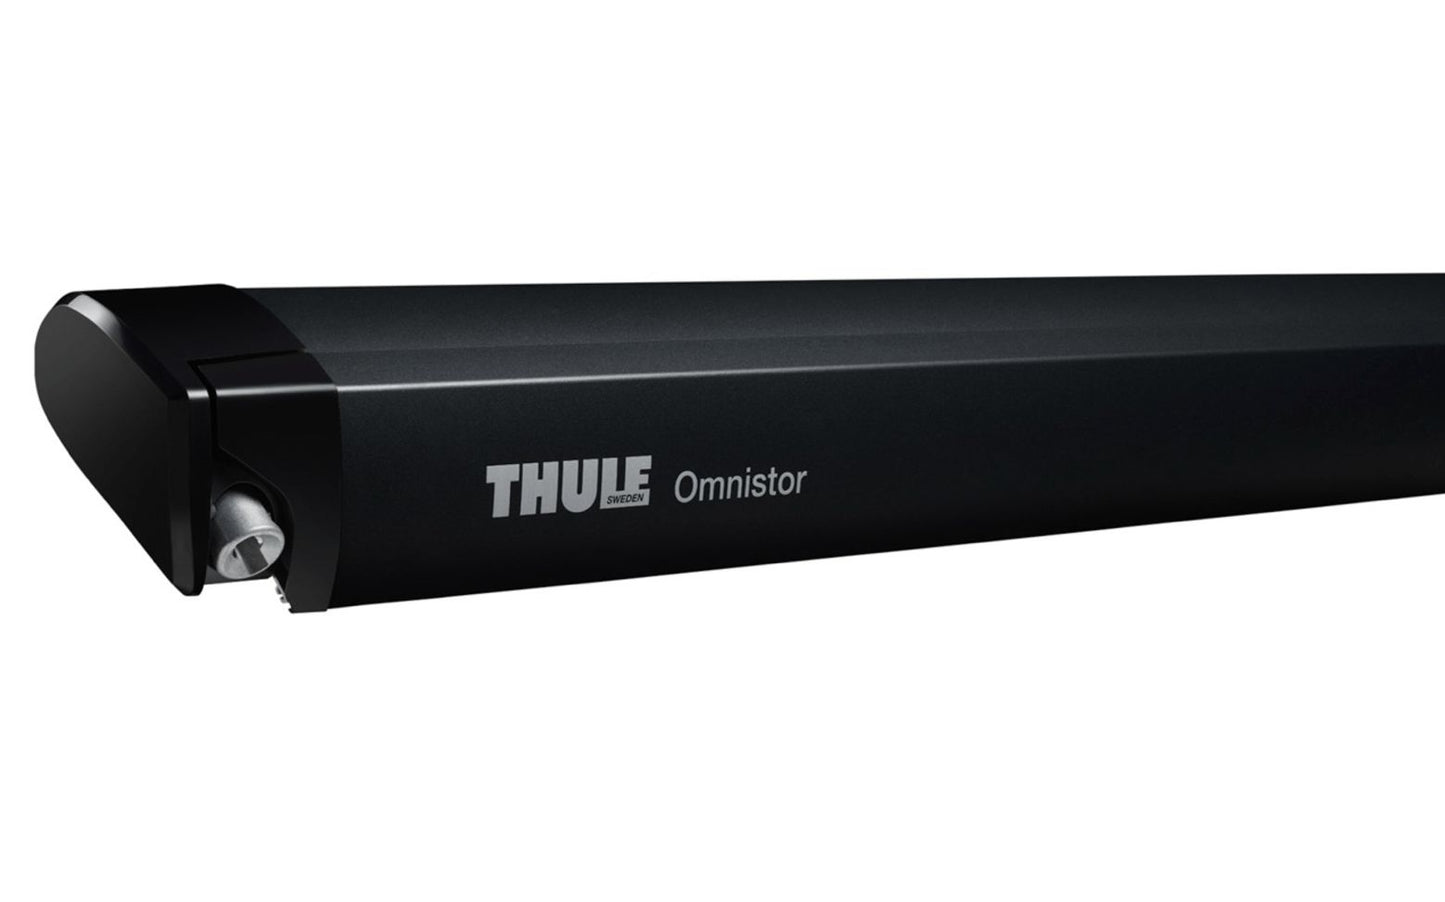 Thule Omnistor 6300 Awnings - Letang Auto Electrical Vehicle Parts